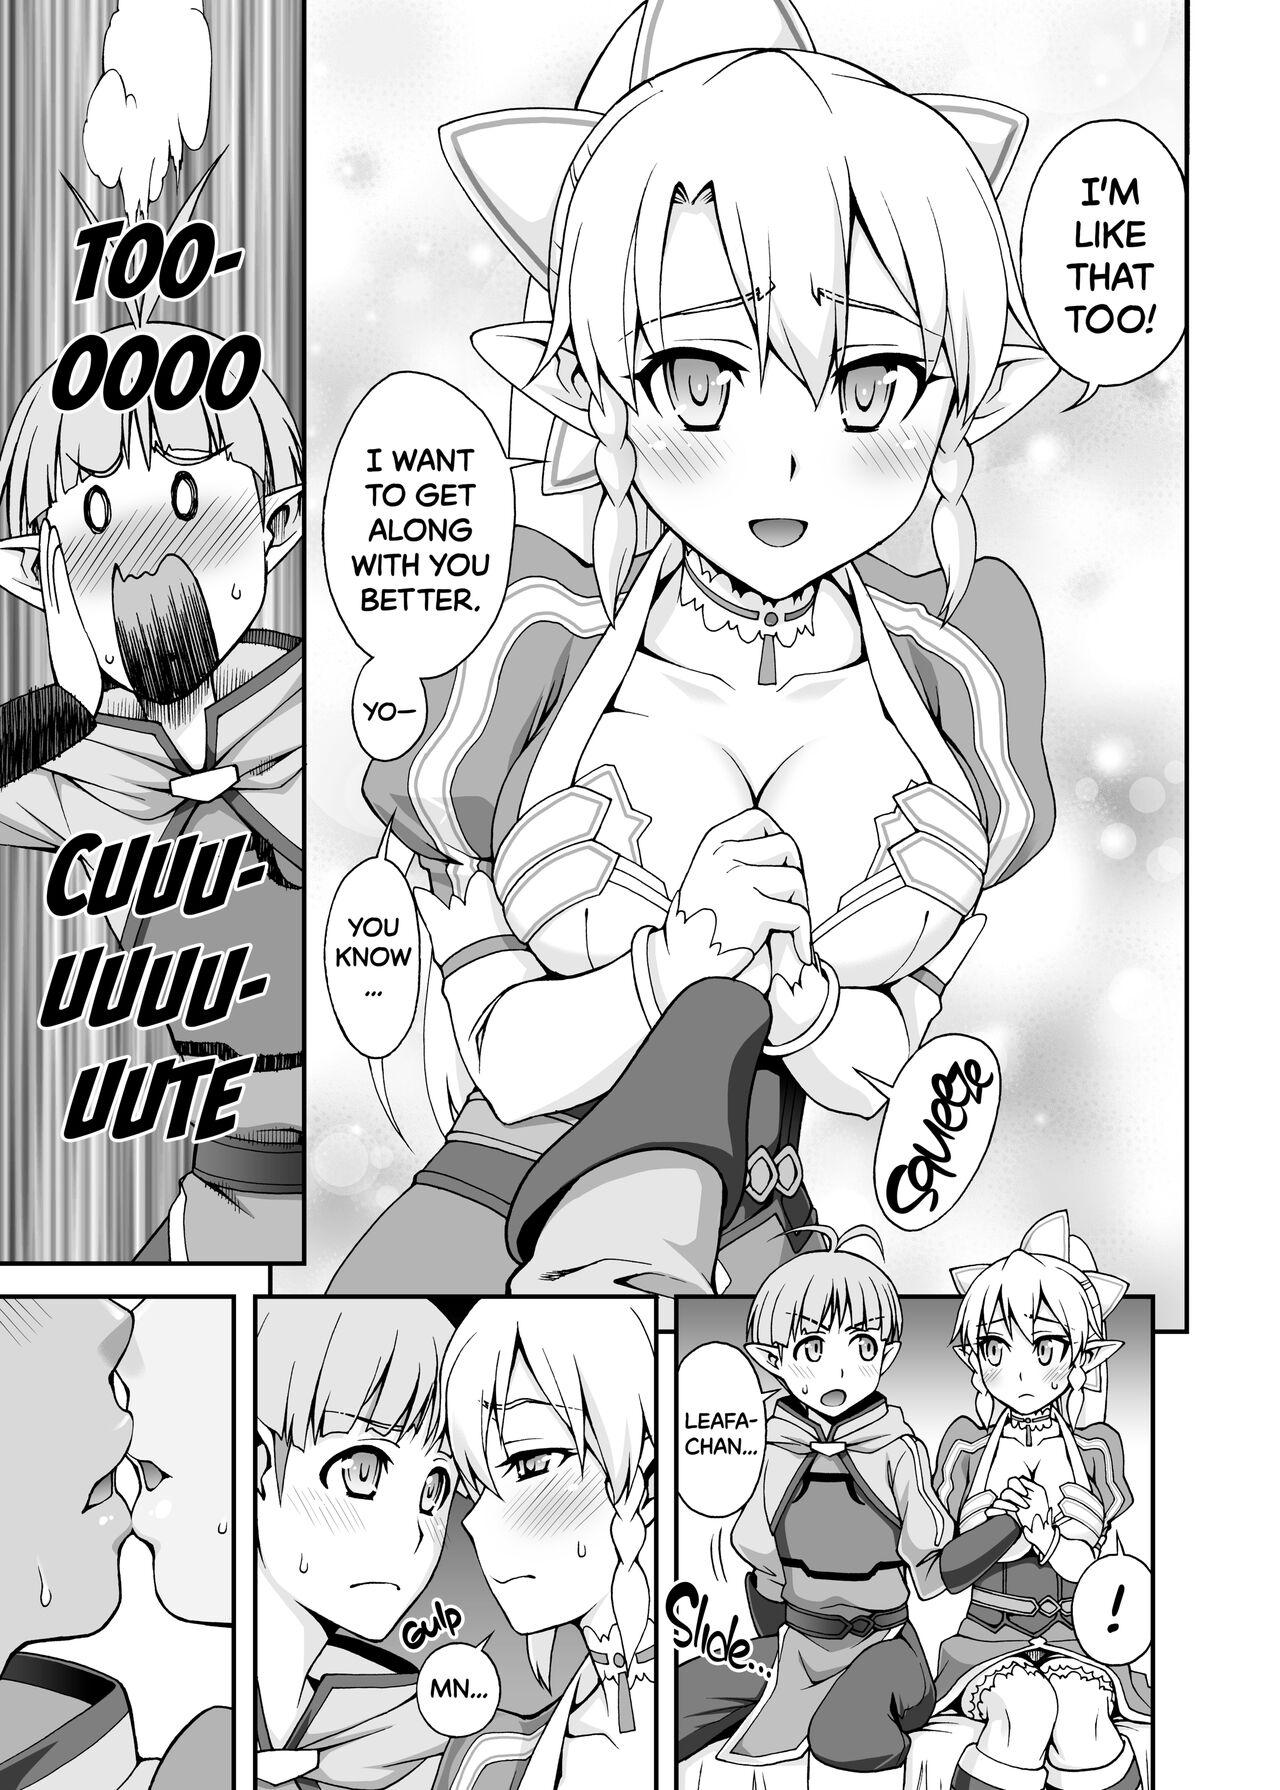 Throatfuck Delphinium Madonna 2 - Sword art online Family Roleplay - Page 10